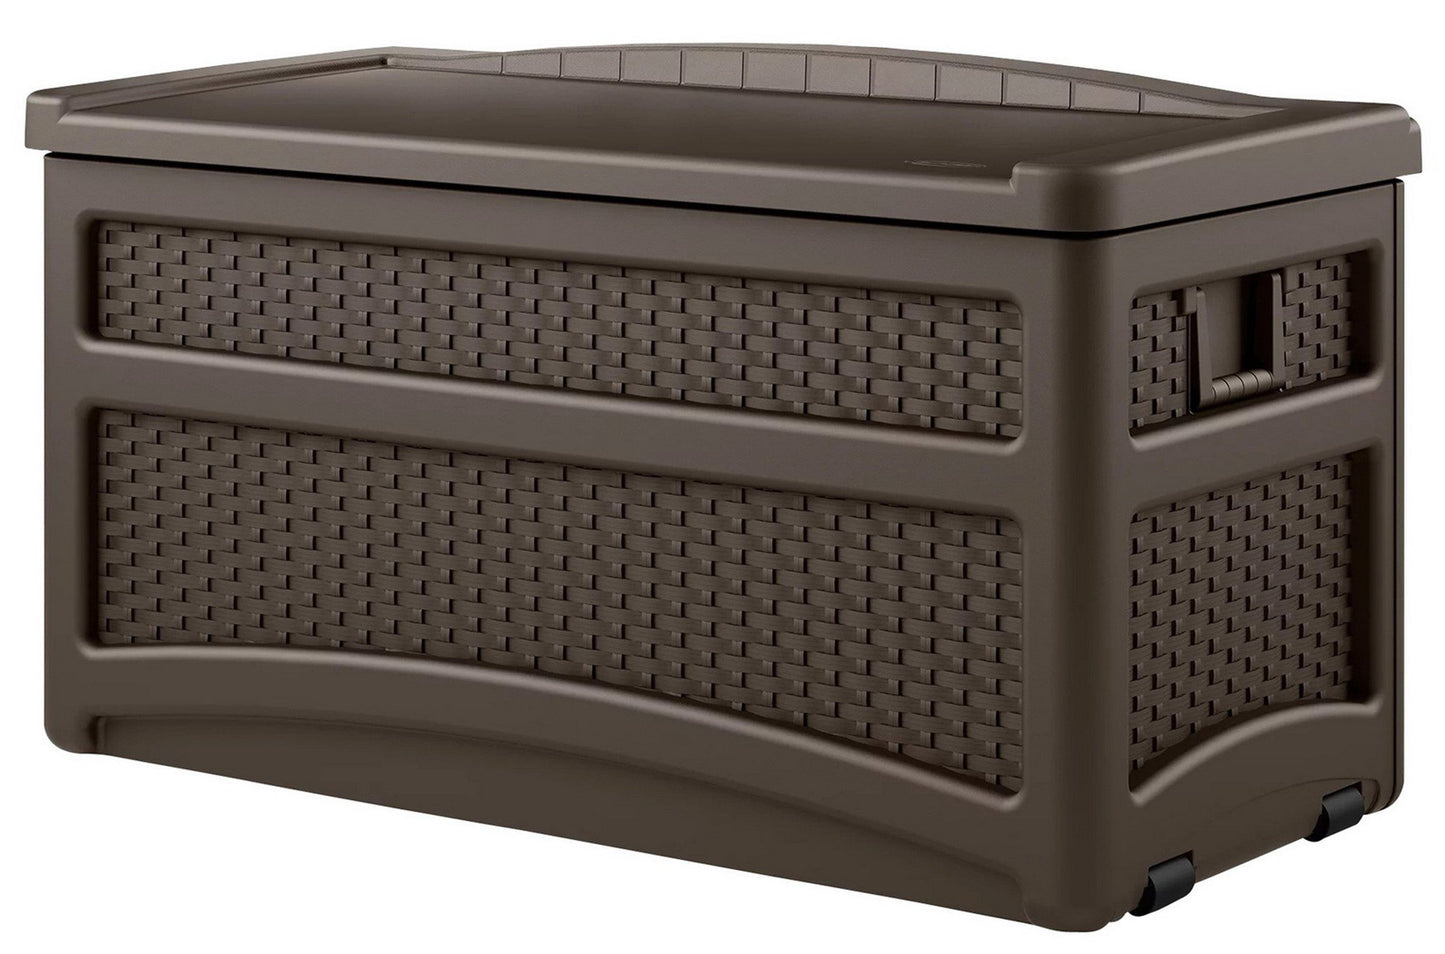 Suncast 73-Gal. Outdoor Durable Resin Wicker Deck Box with Wheels